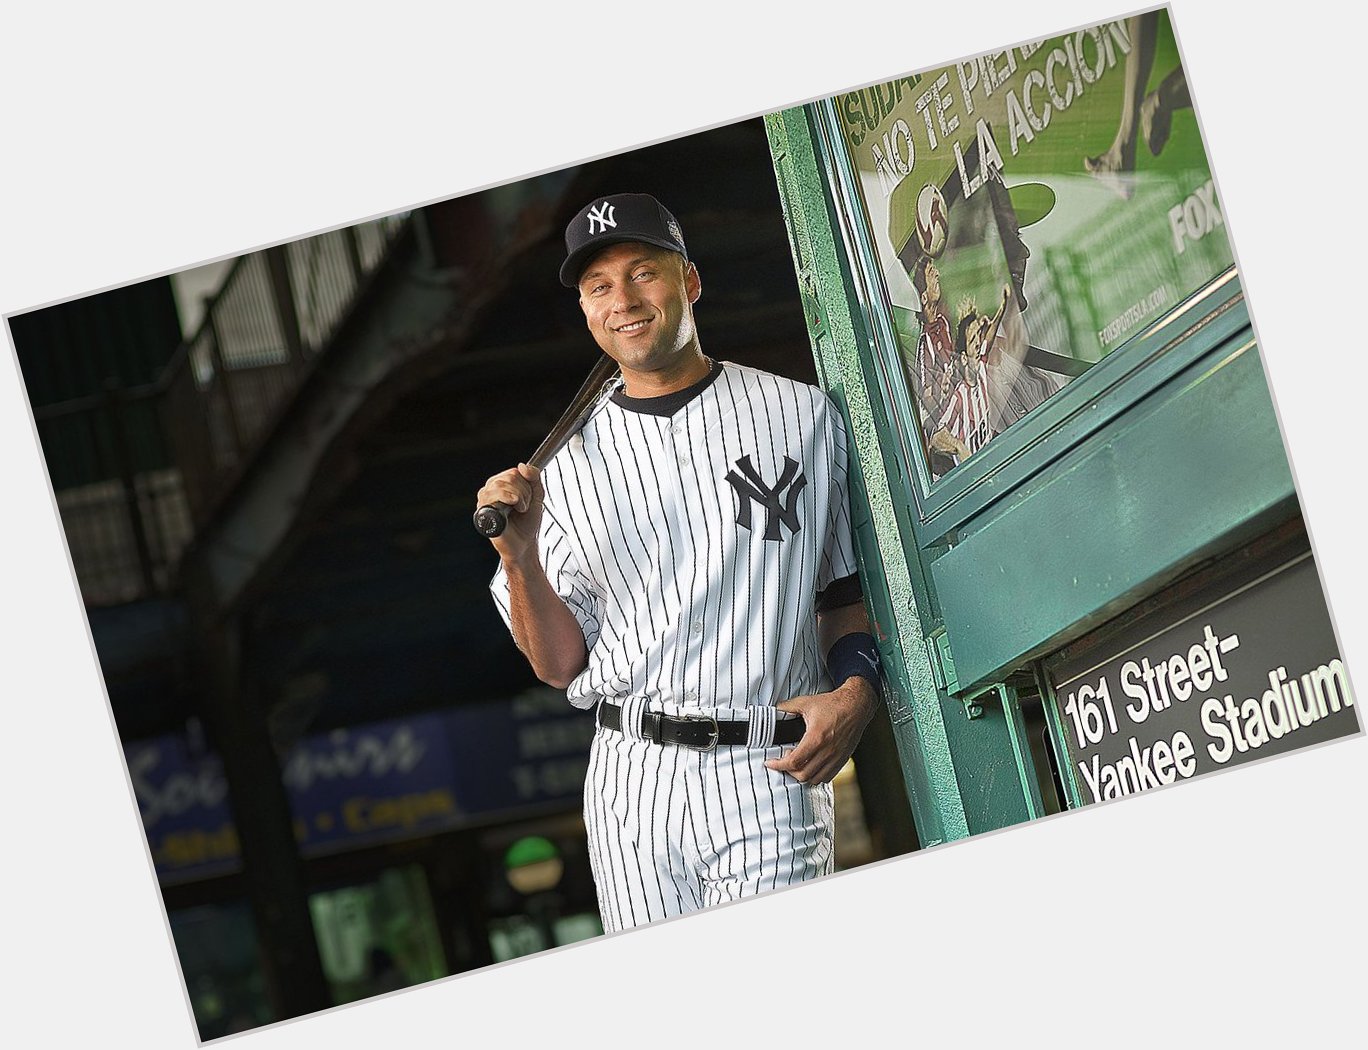 HAPPY BIRTHDAY TO THE CAPTAIN, DEREK JETER! WE LOVE YOU MAN! What\s your favorite Jeter memory?   